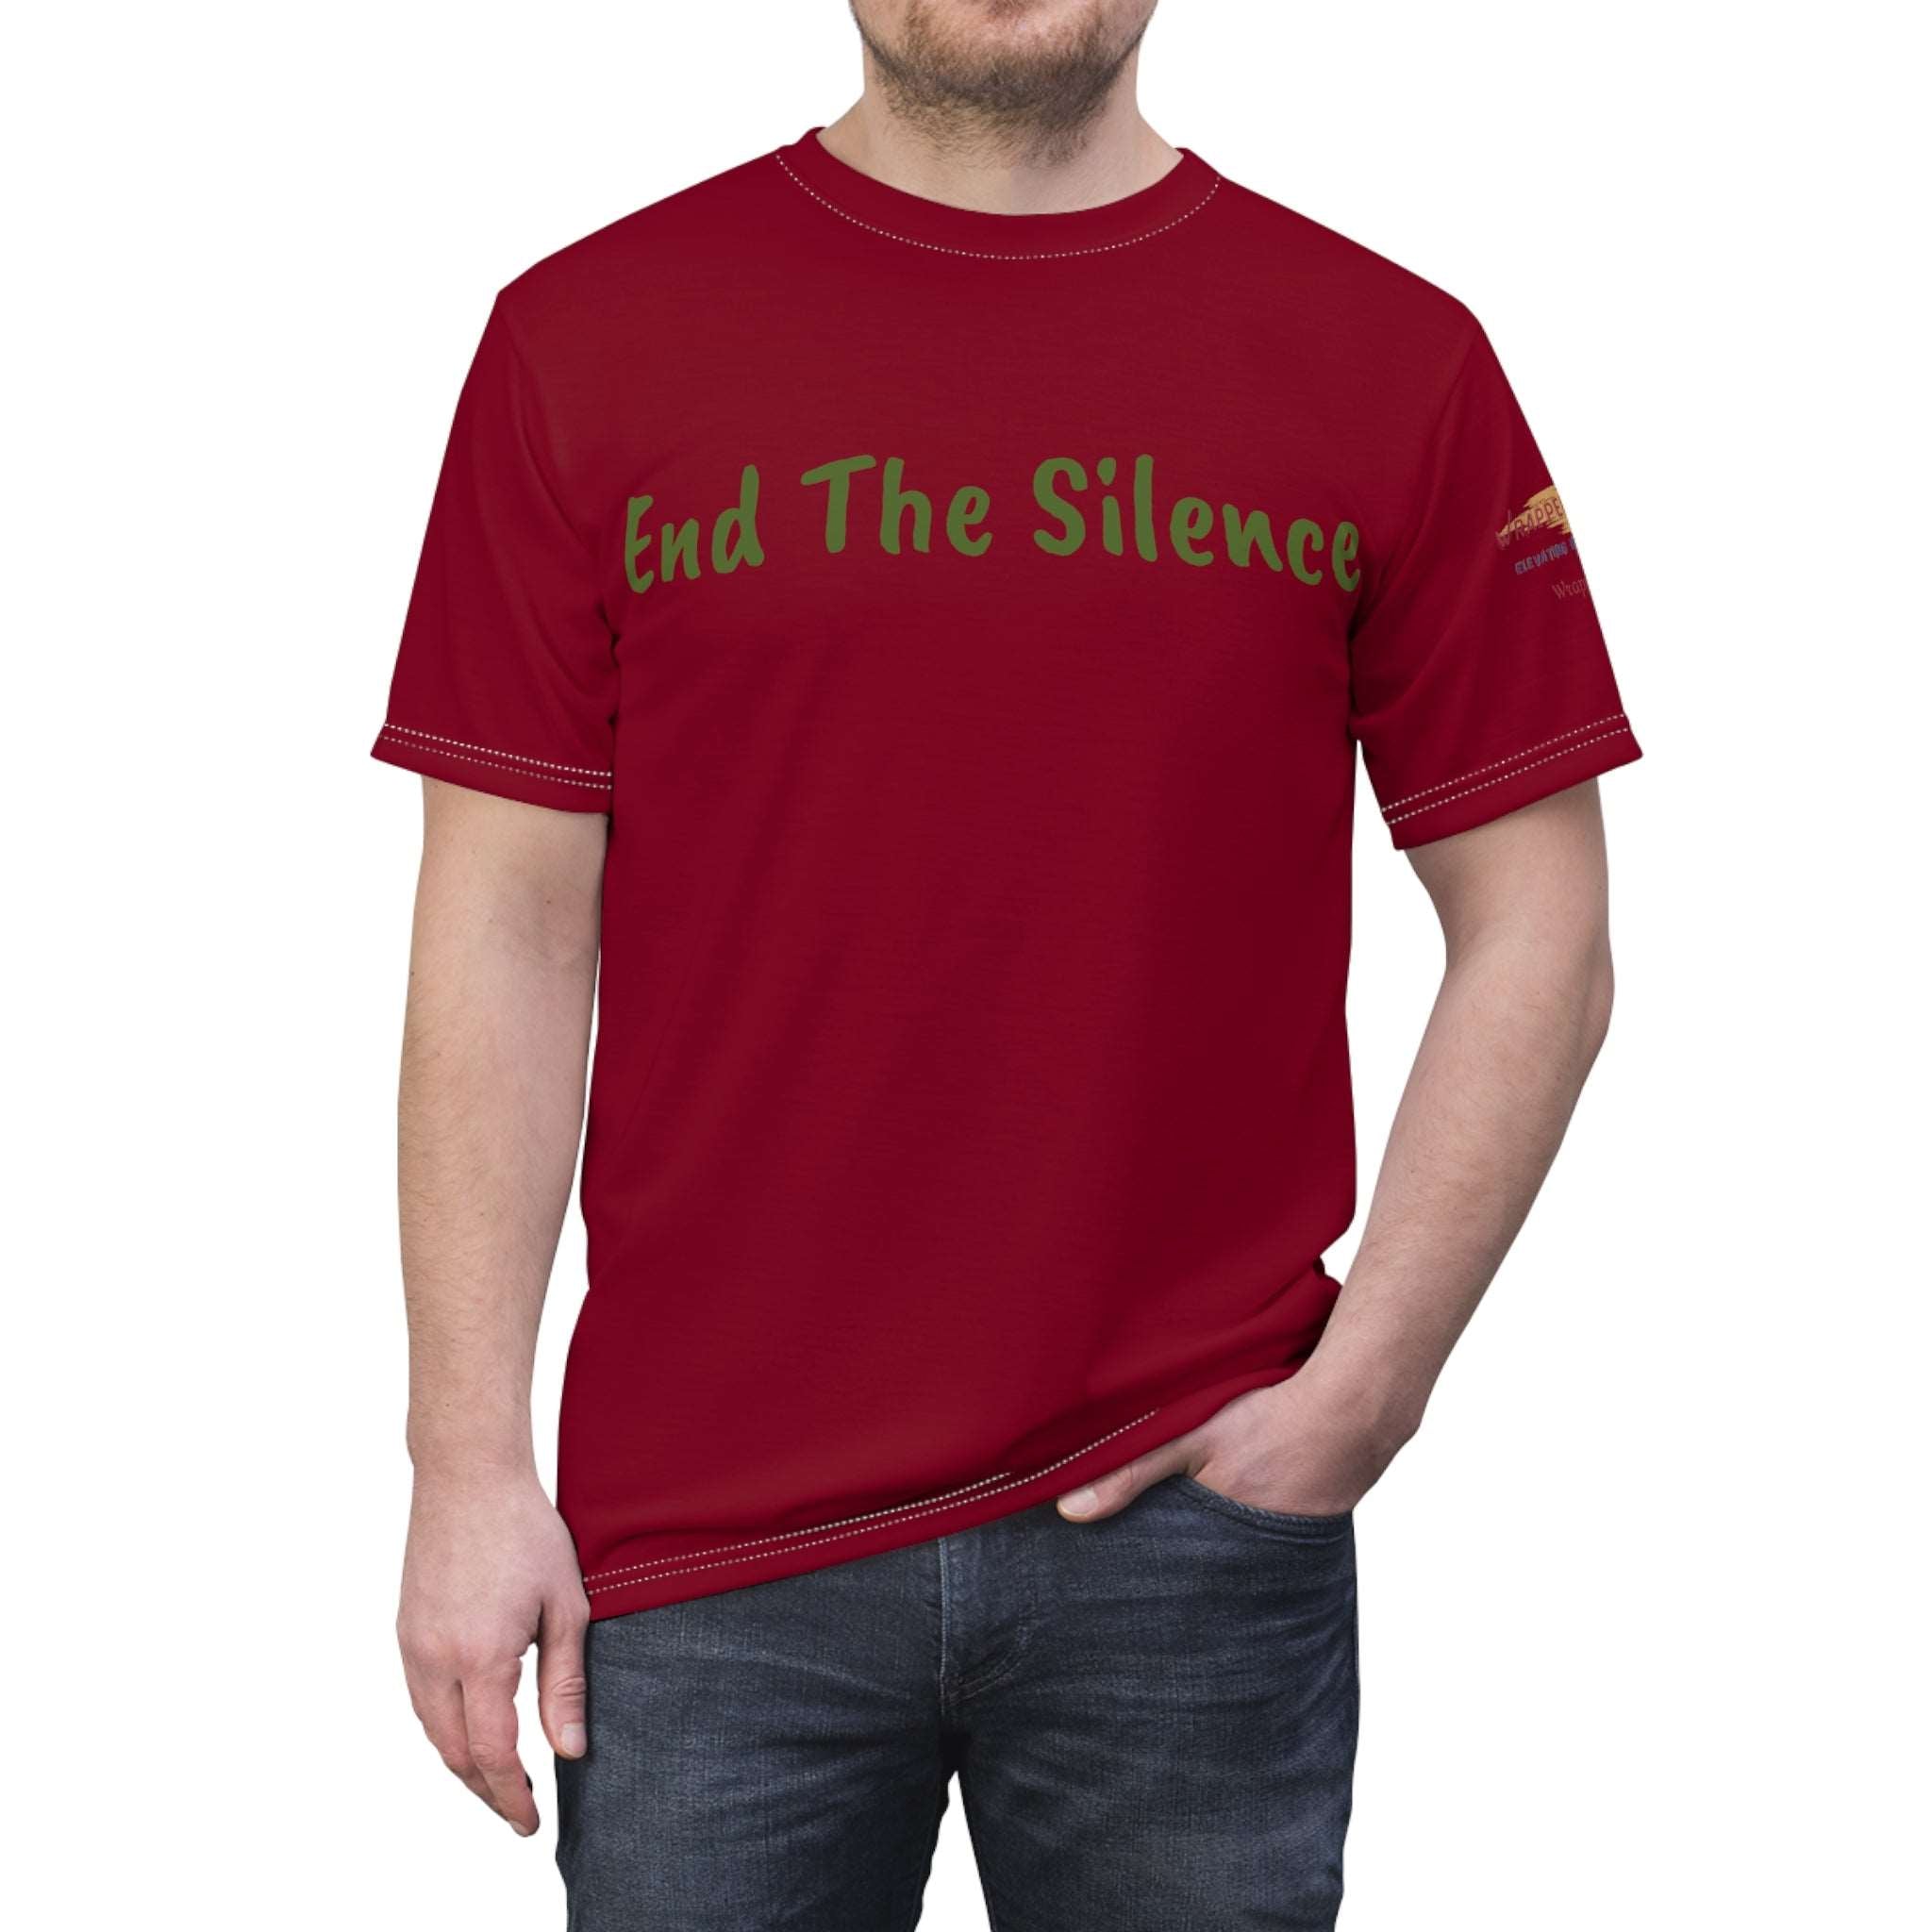 End the Silence - Unisex Cut & Sew Tee White stitching 4 oz. Athleisure Wear Comfort Conversation Cut & Sew Donation Initiative Mental Health Polyester Silence Tee Unisex All Over Prints 6368884713612852867_2048_d8d14056-6a55-42fa-8928-8ea2acf5a074 Printify